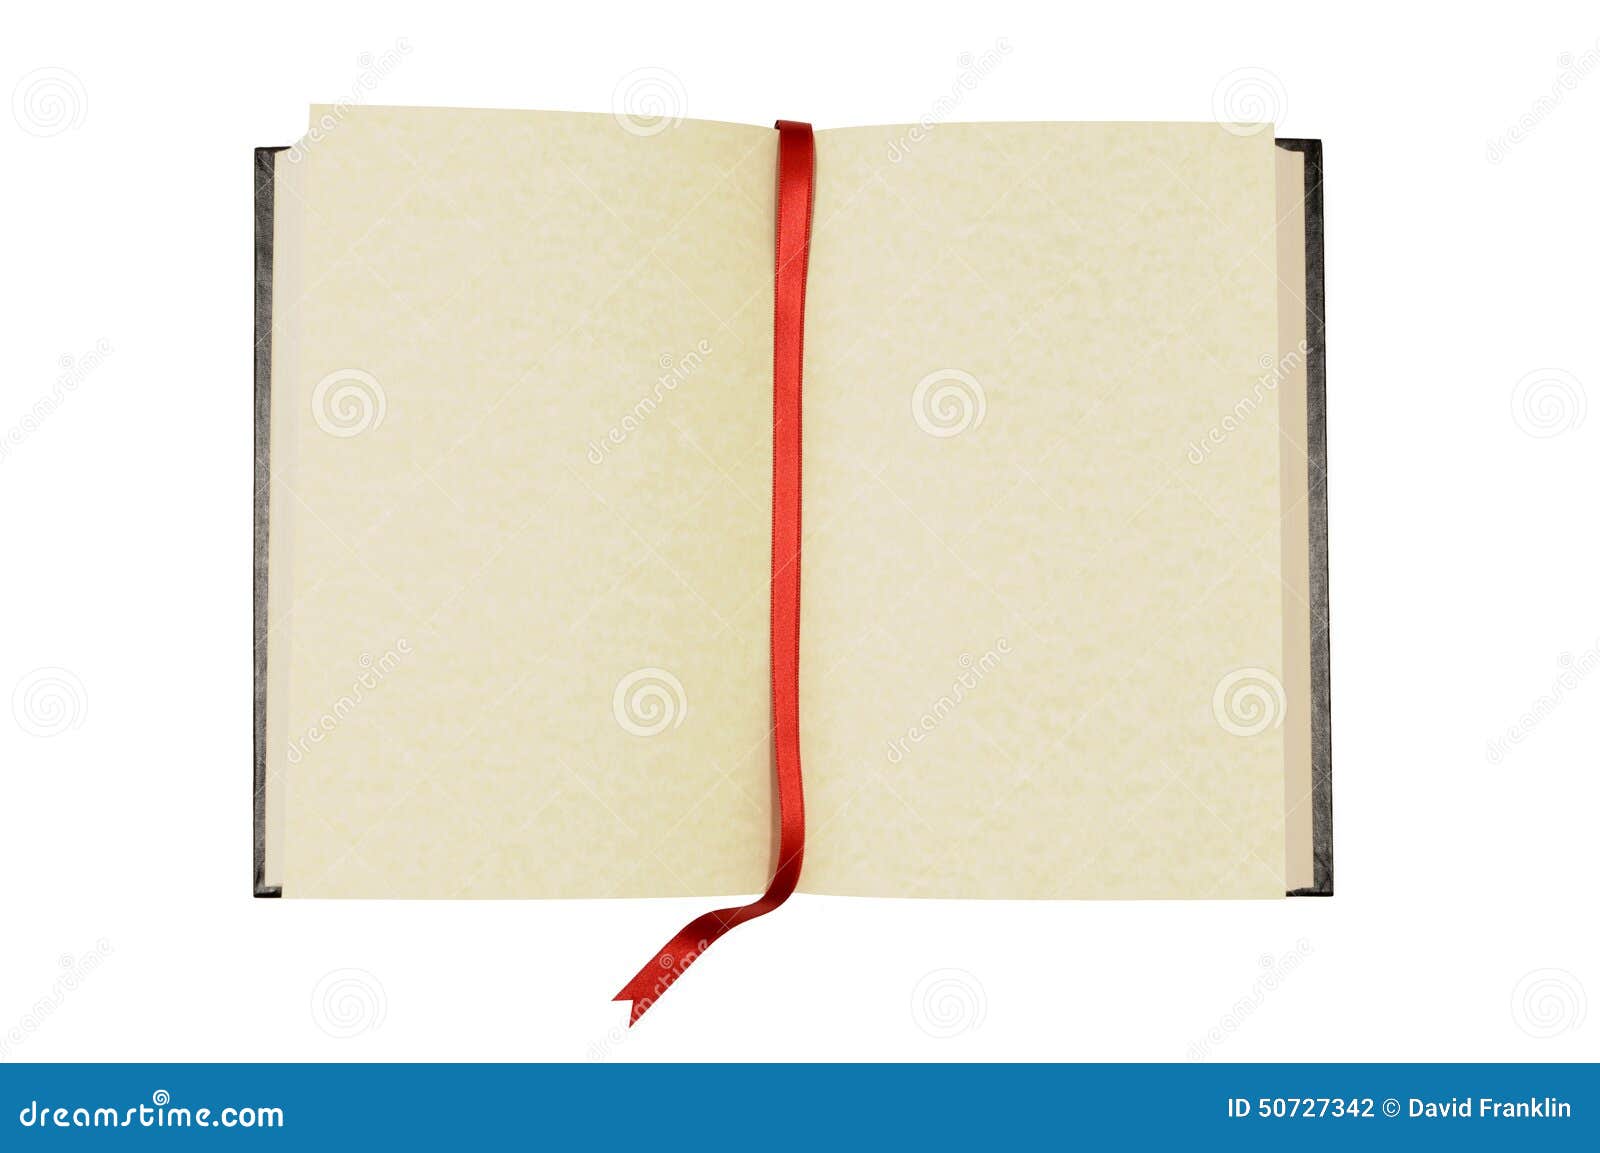 https://thumbs.dreamstime.com/z/blank-book-bookmark-old-yellow-parchment-pages-ribbon-isolated-white-background-50727342.jpg